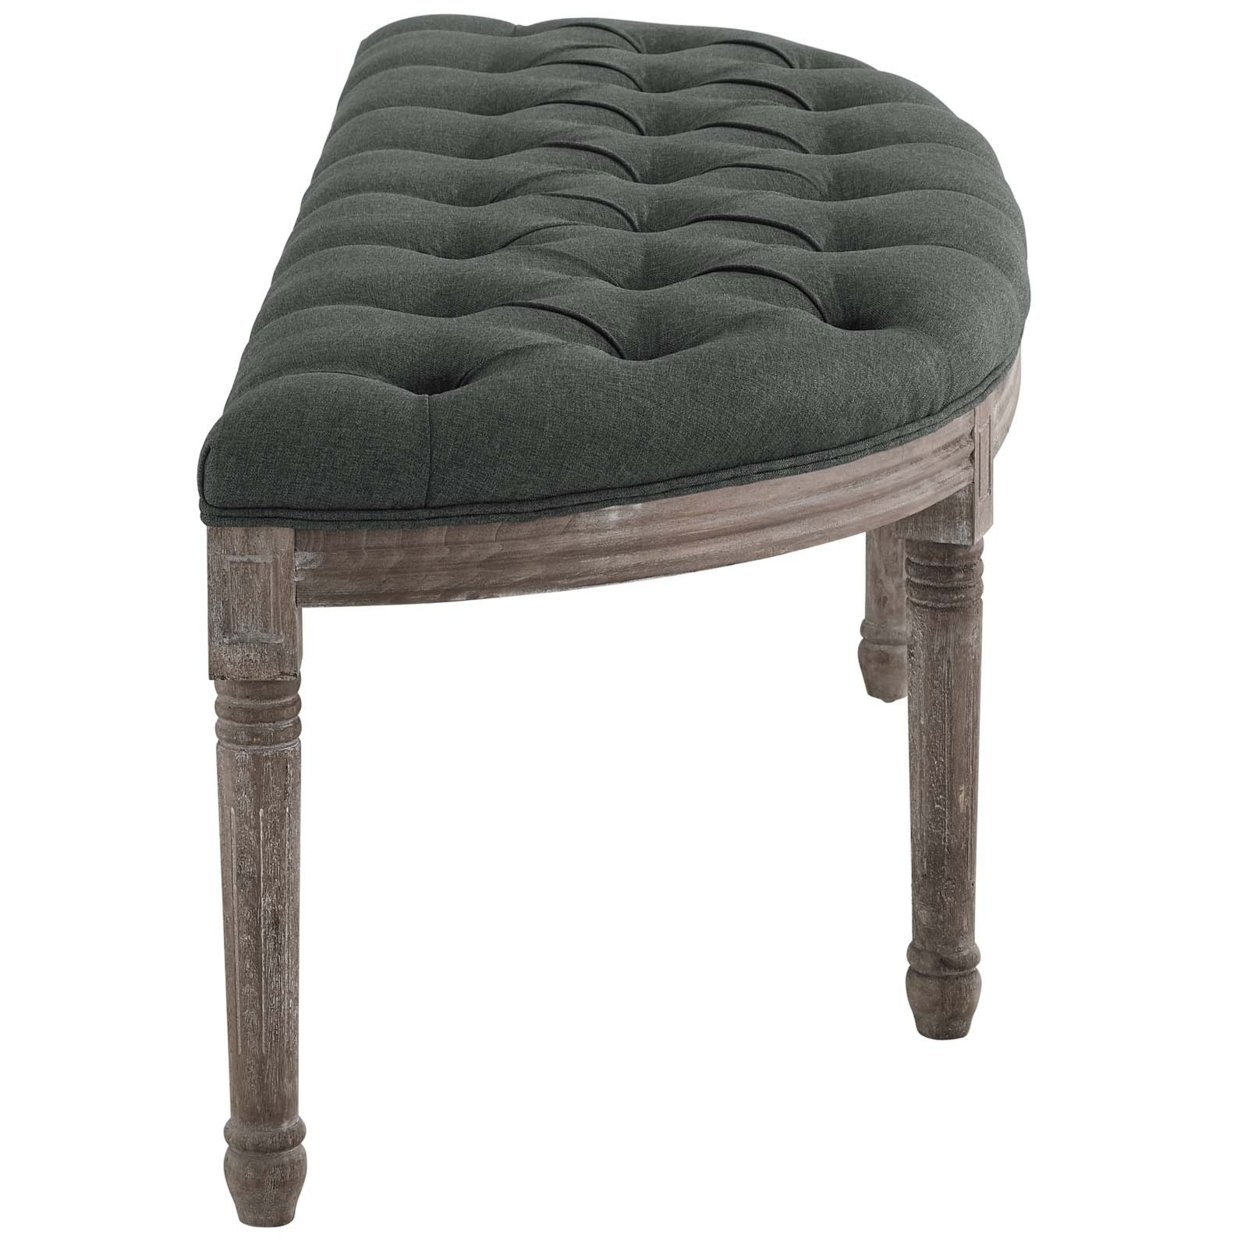 Esteem Vintage French Upholstered Fabric Semi-Circle Bench, Gray